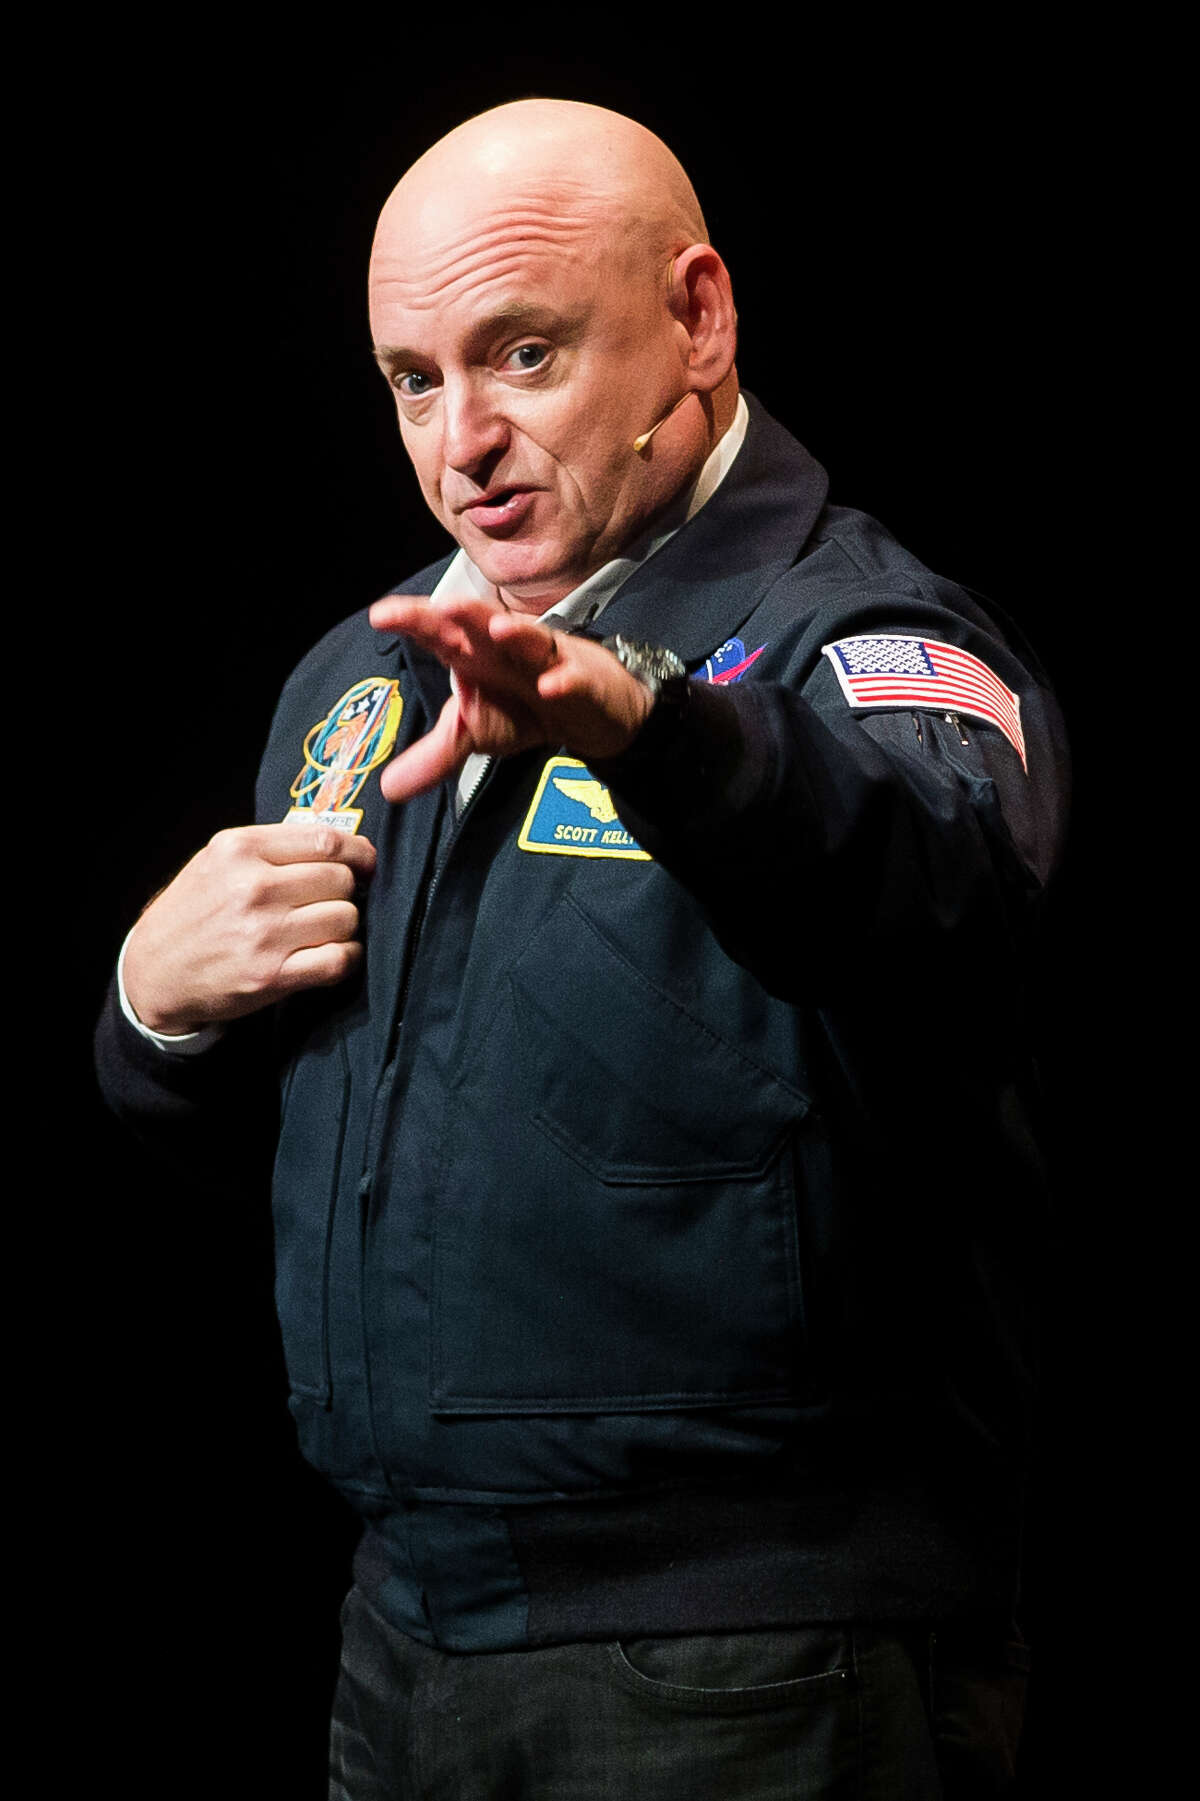 Captain Scott Kelly speaks in front of a packed auditorium during the Matrix:Midland festival on Tuesday, June 4, 2019 at the Midland Center for the Arts. (Katy Kildee/kkildee@mdn.net)